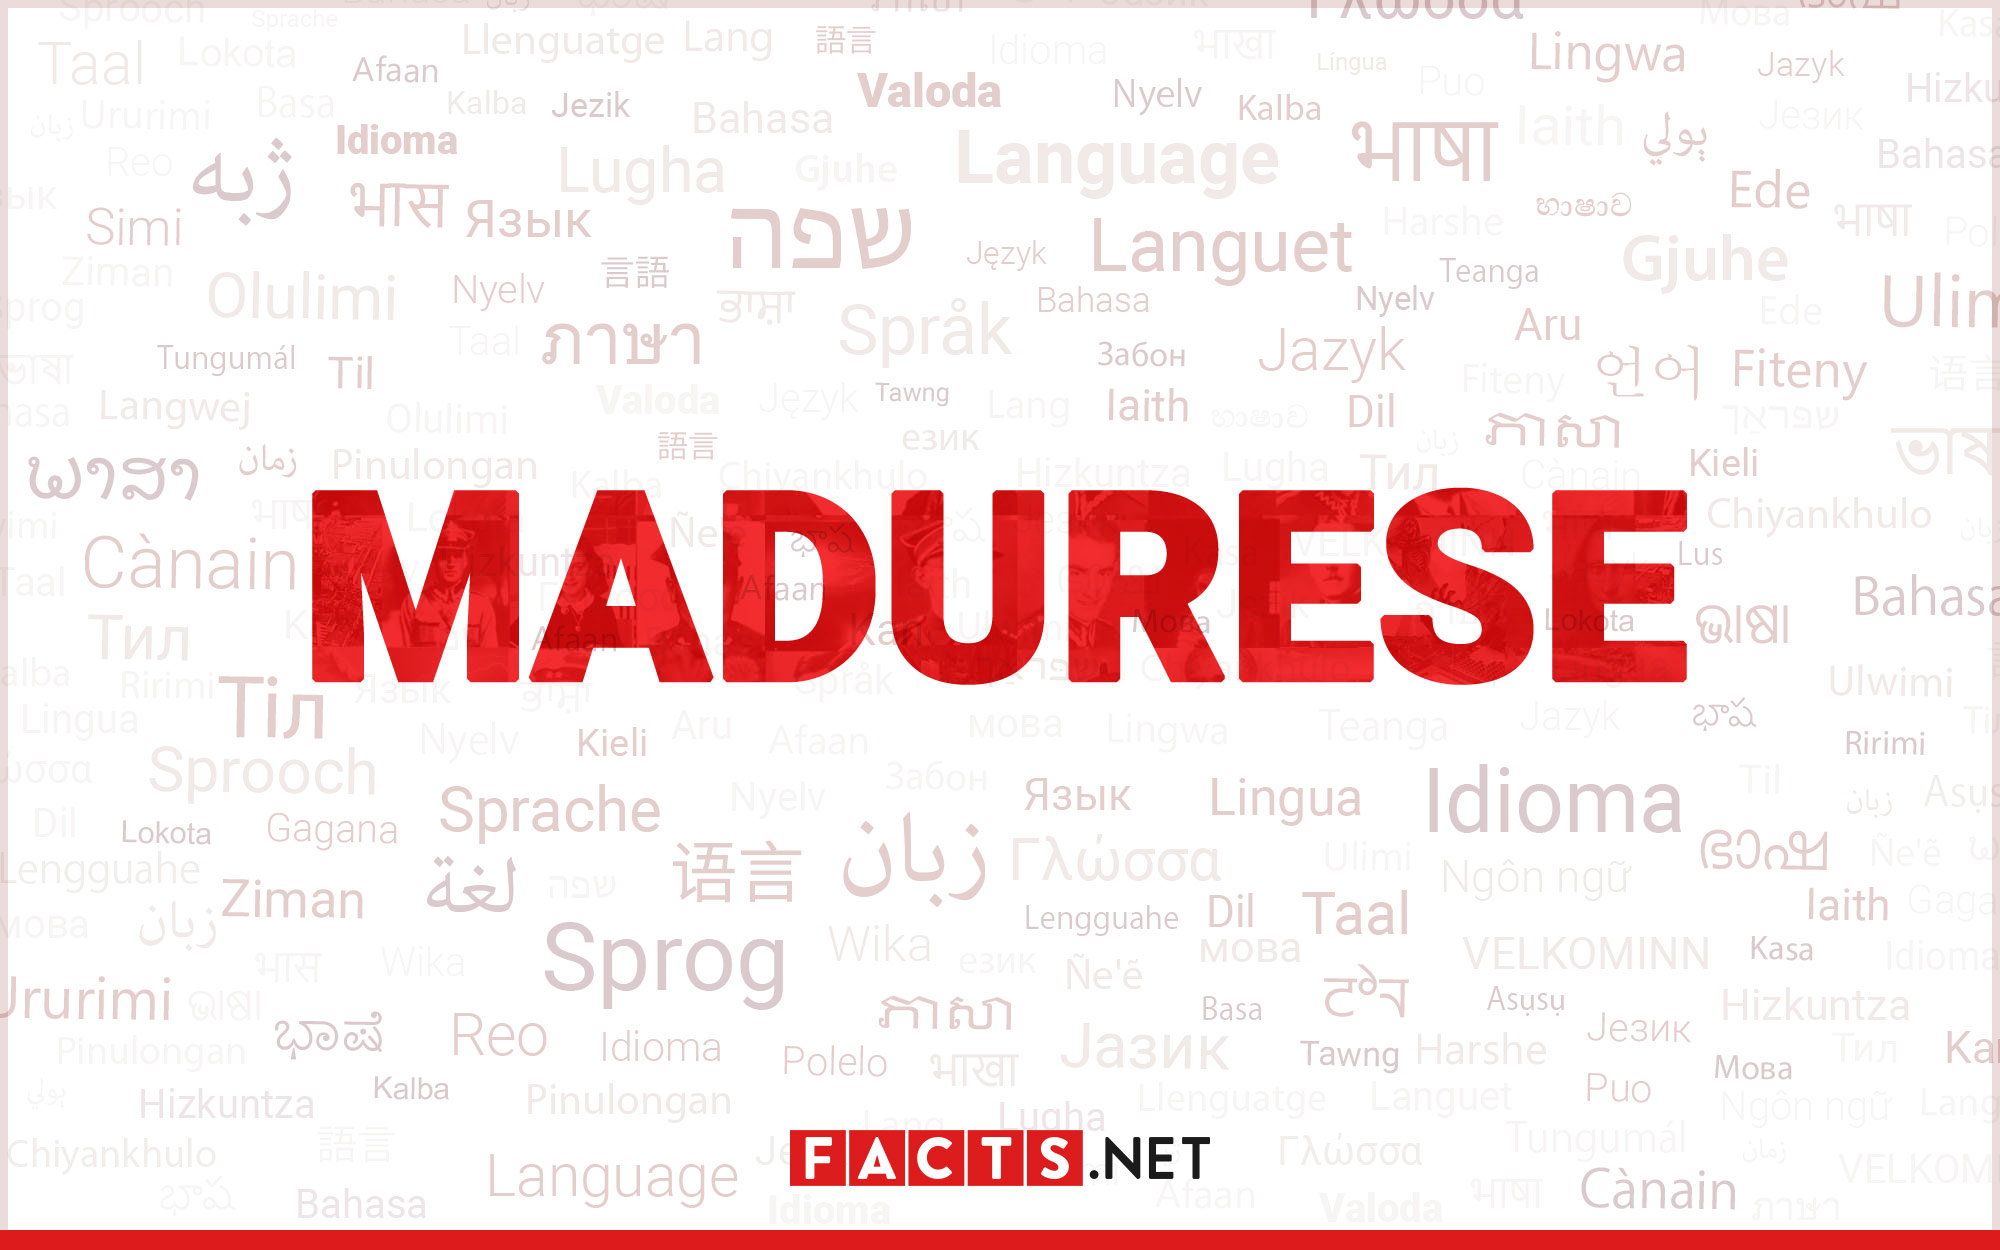 9-astounding-facts-about-madurese